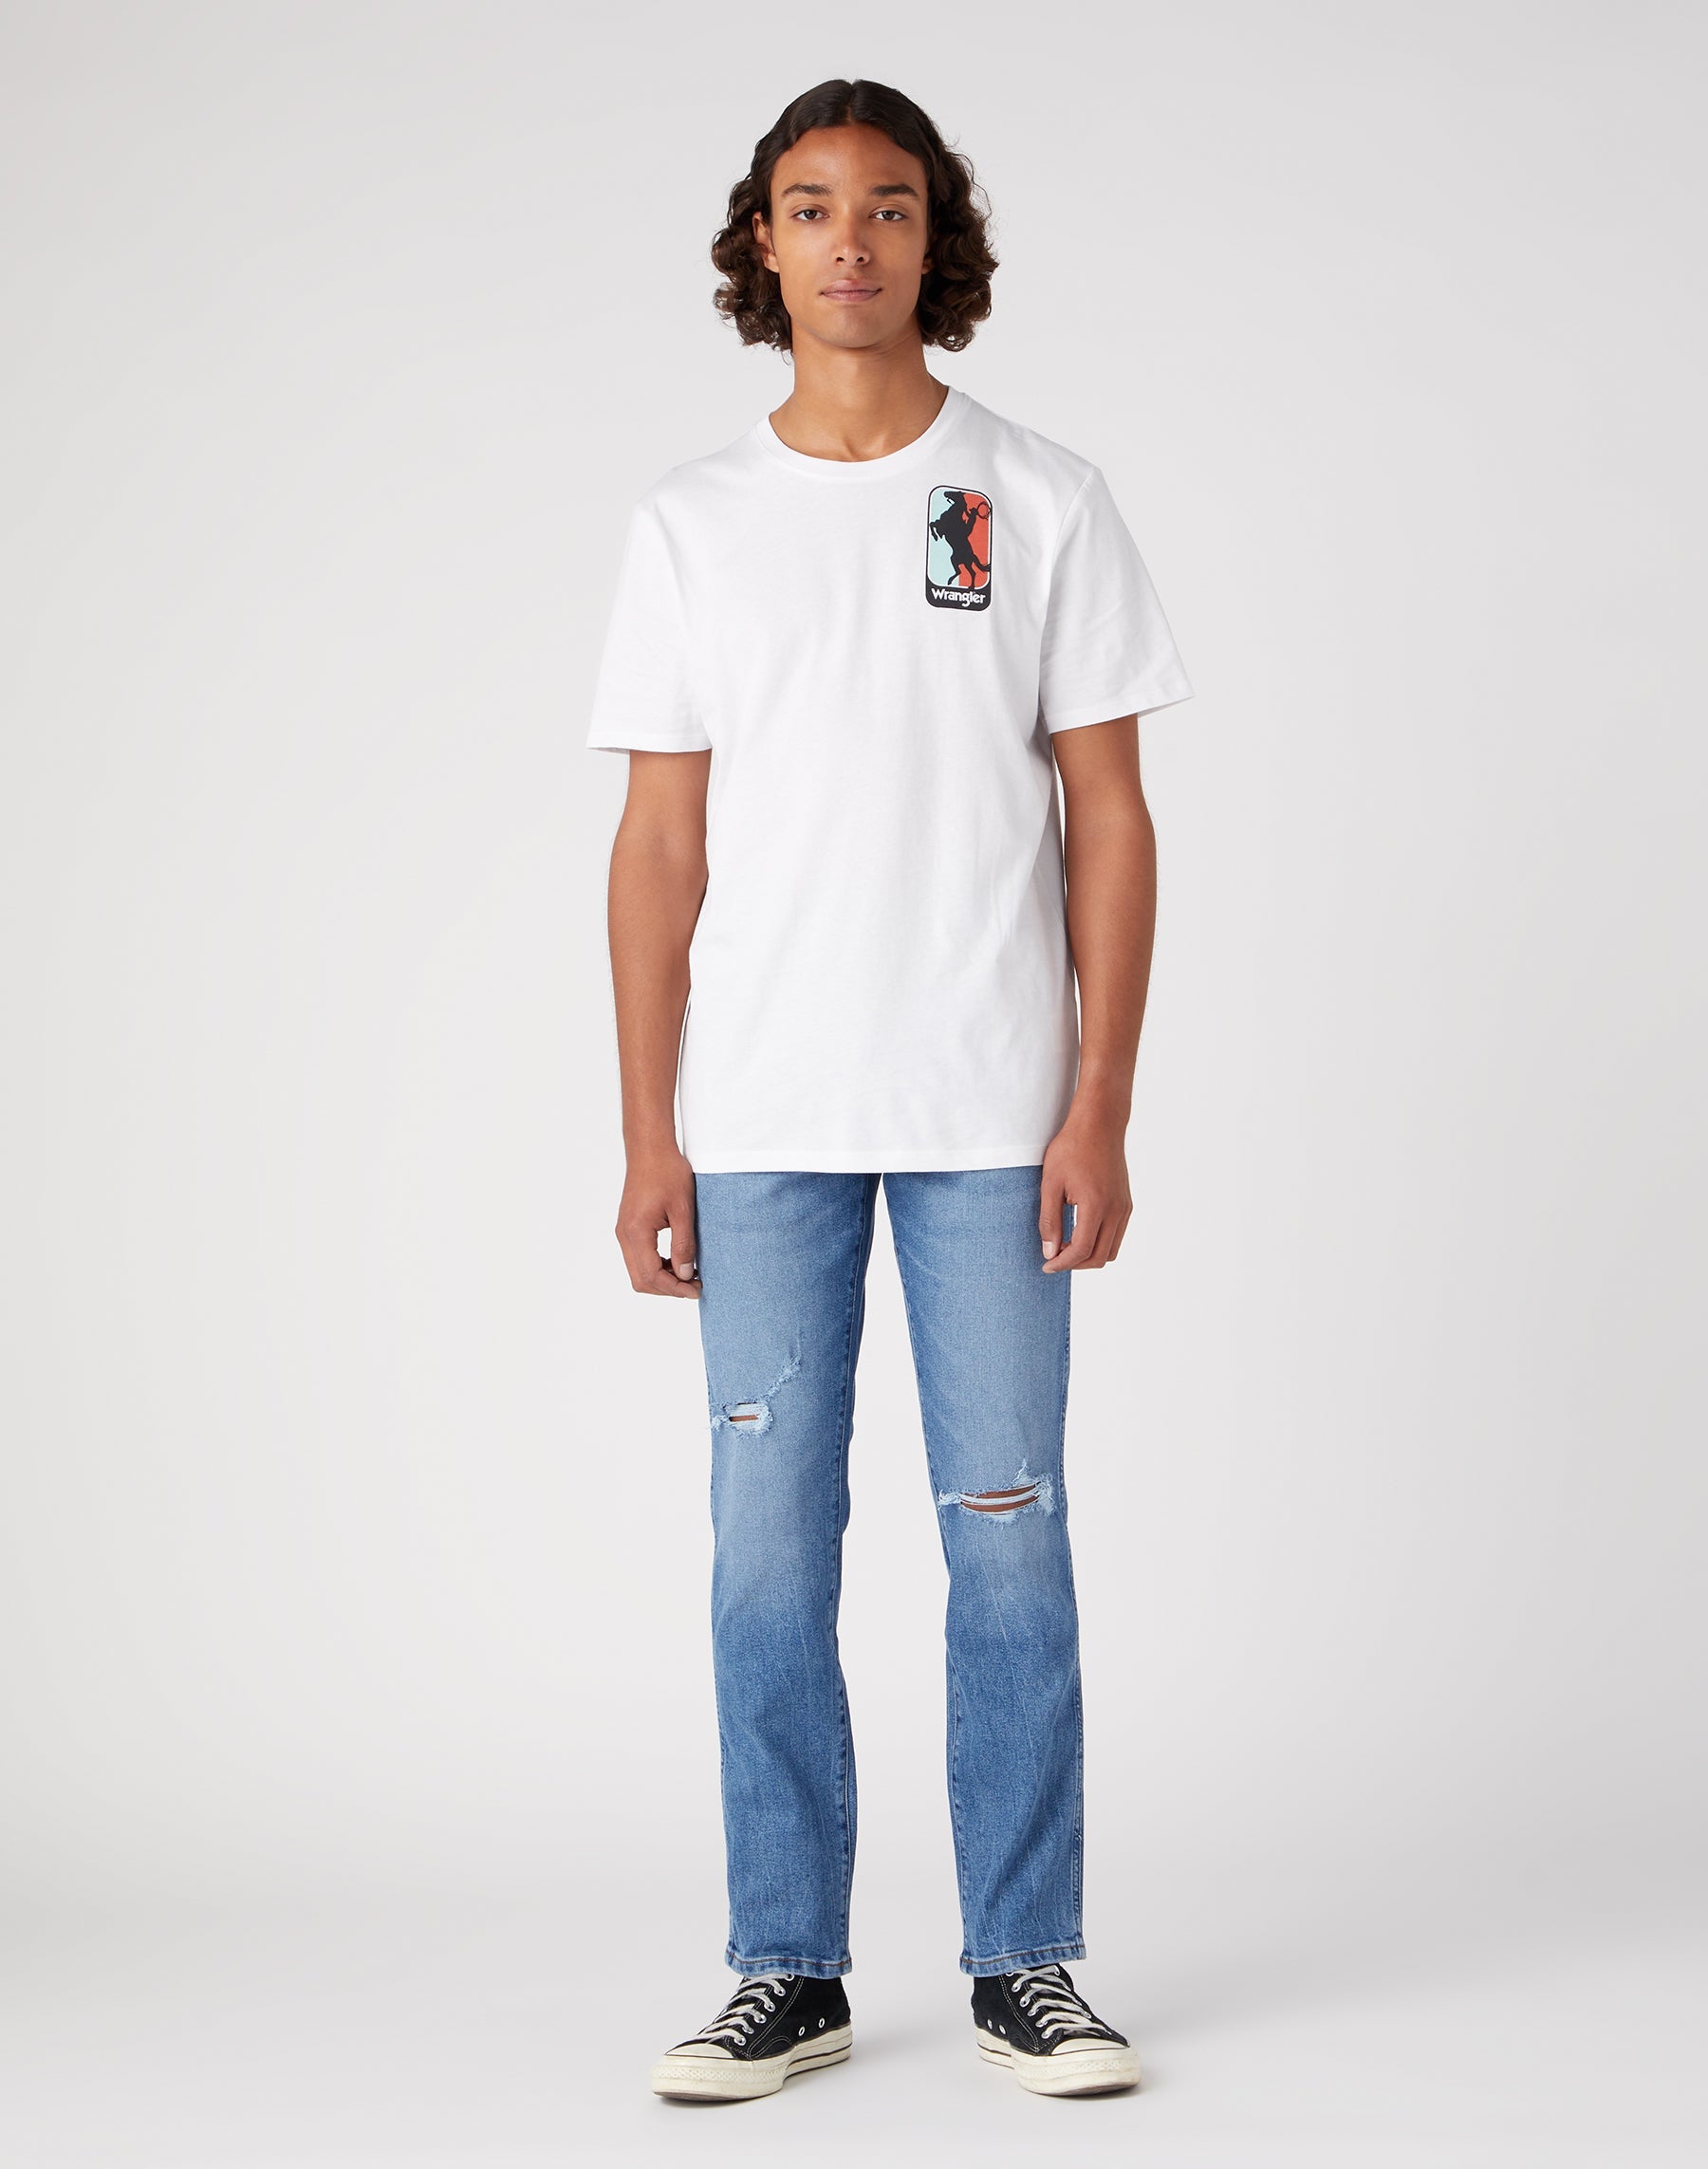 Graphic Tee in White T-Shirts Wrangler   